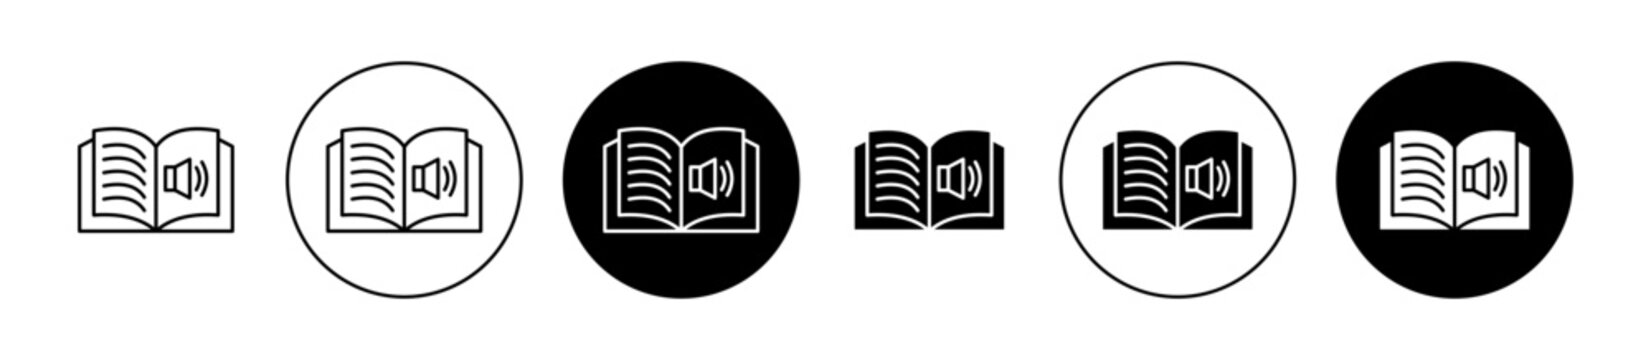 audio book vector icon set in black color. Suitable for apps and website UI designs